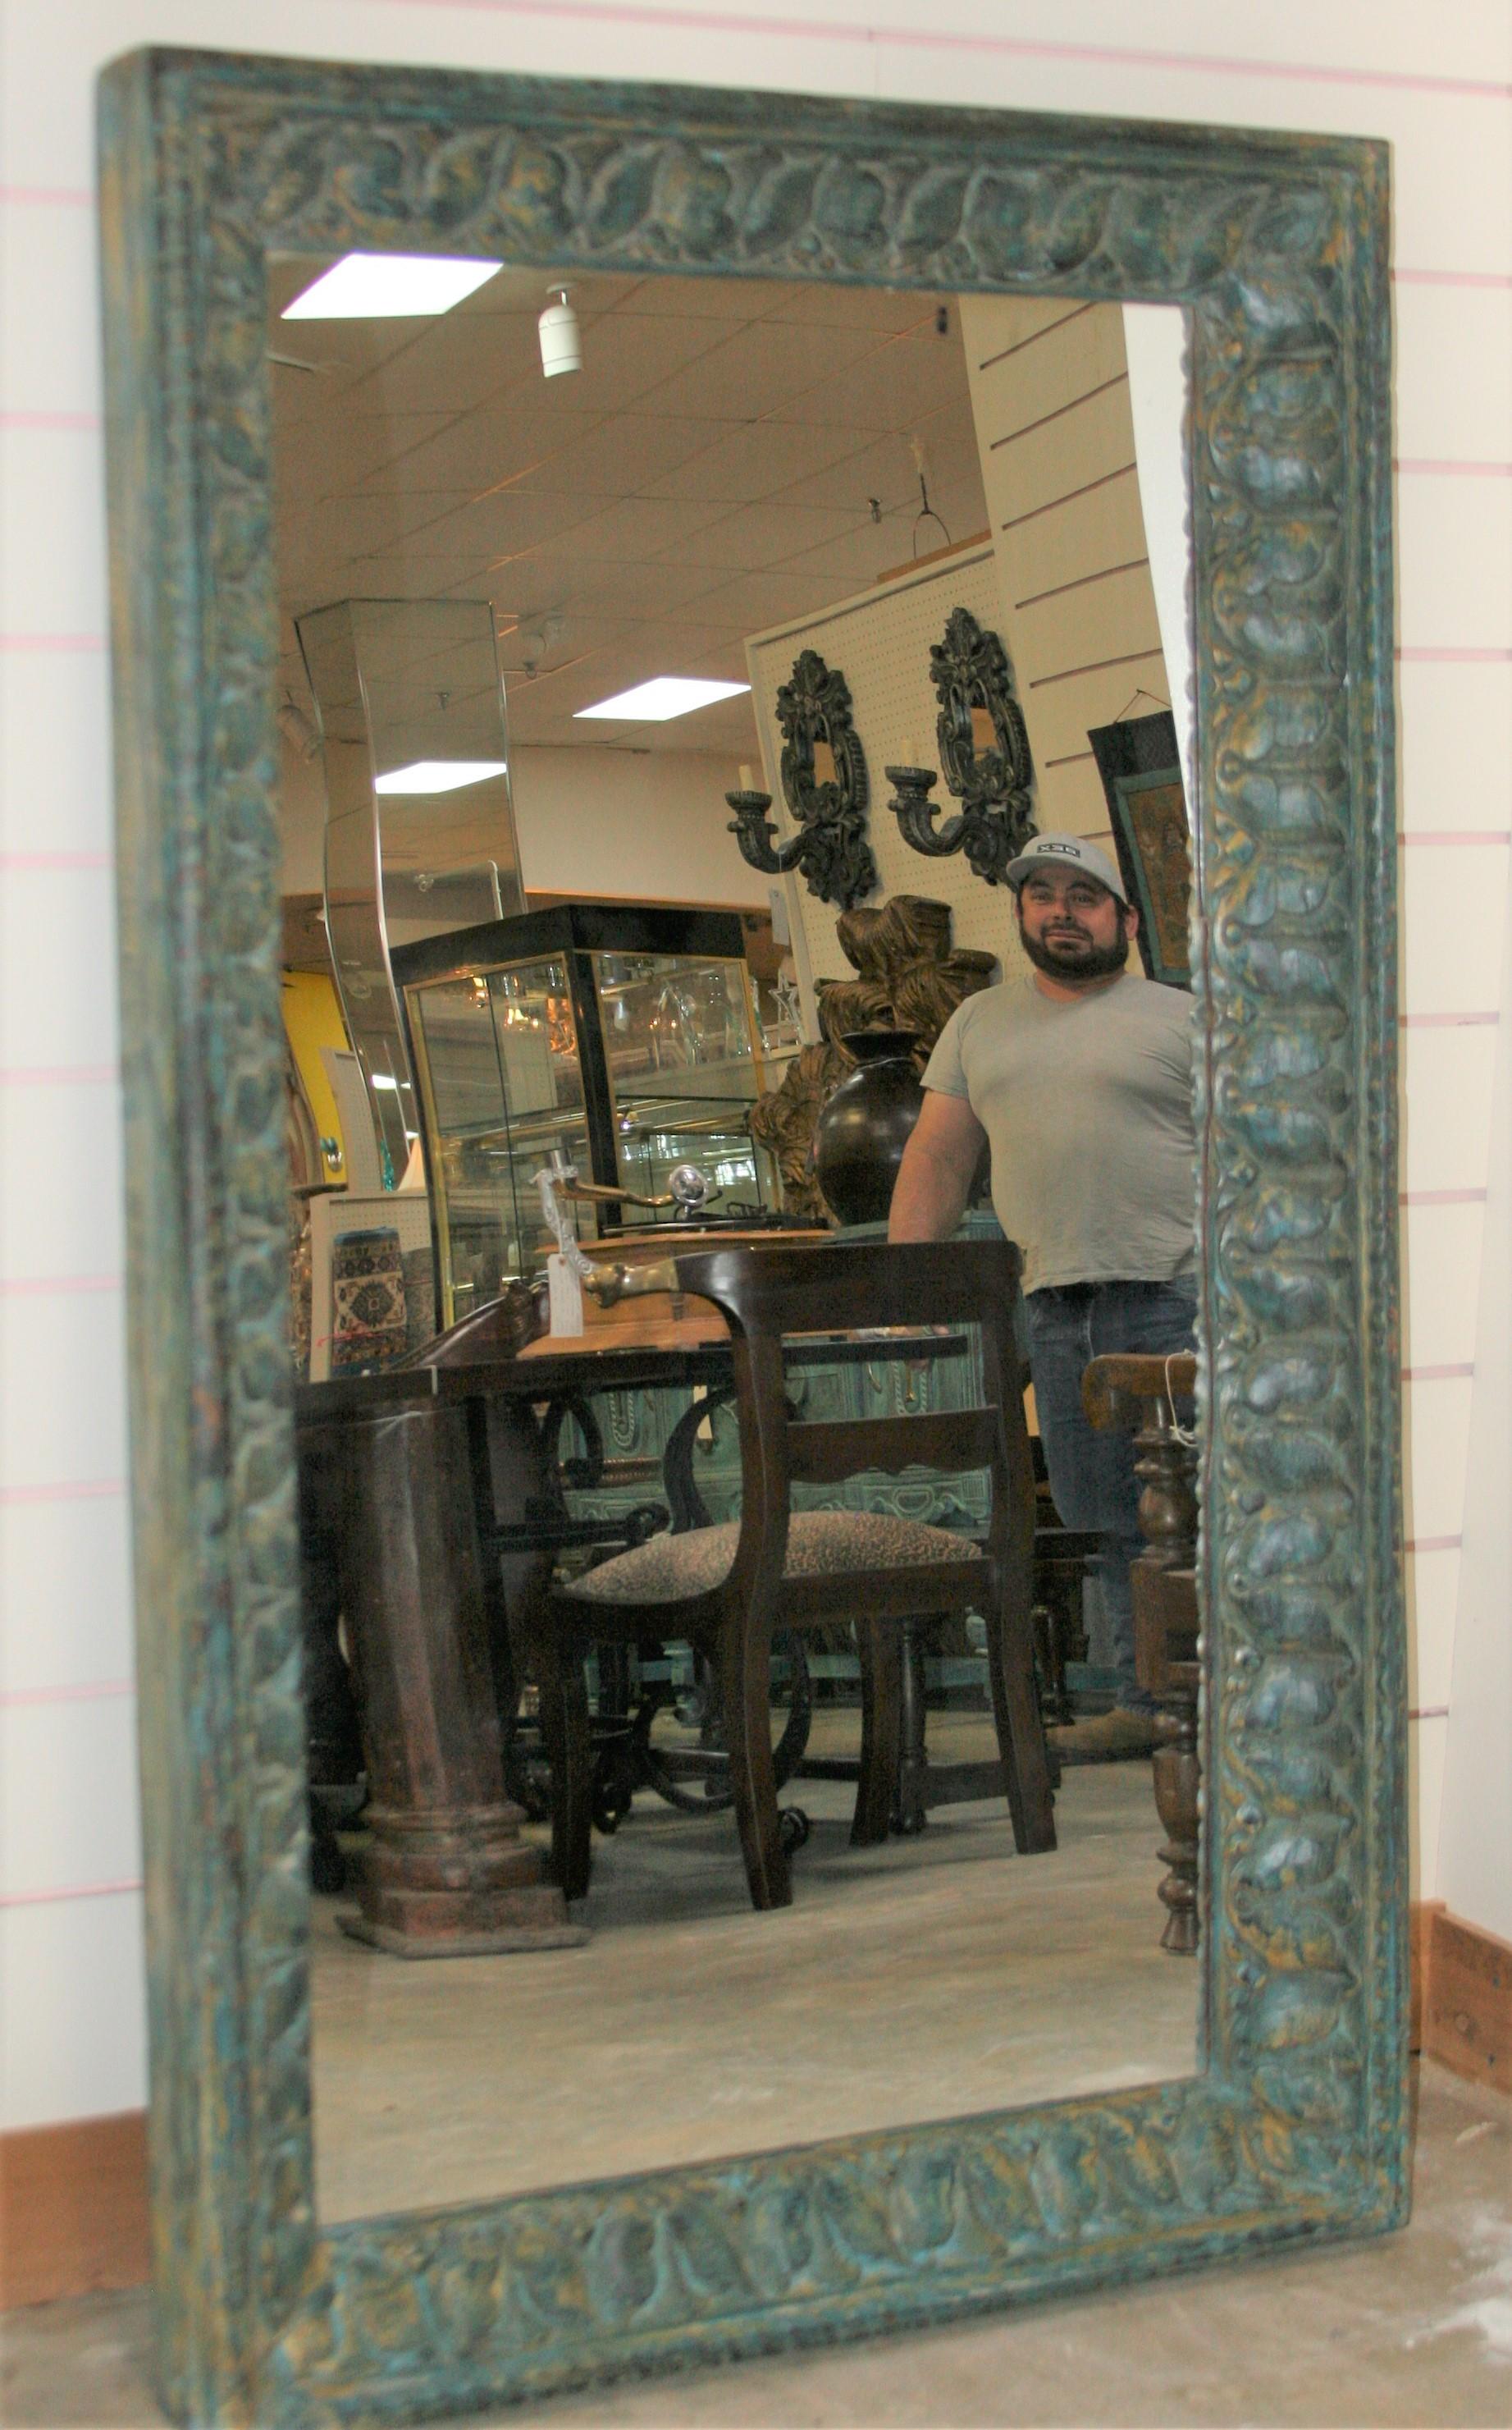 The mirror frame comes from a 19th century colonial home. It is highly carved and painted in turquoise green. It is made of fine teakwood. It is handcrafted and carved in old world carpentry. This is an extraordinary mirror that cannot be matched by